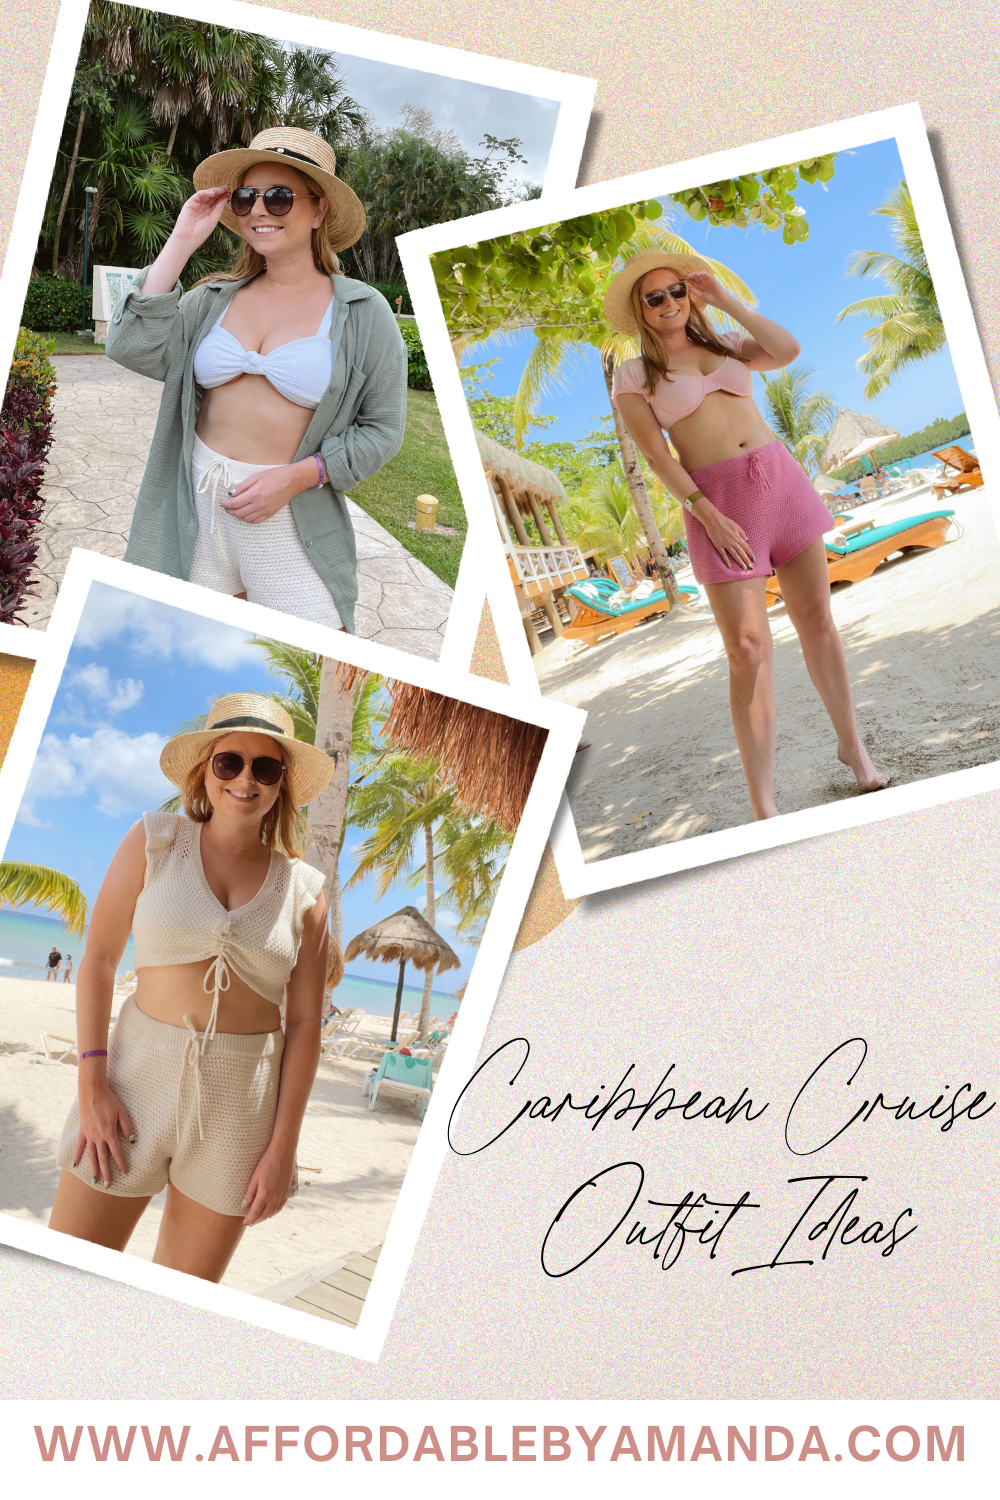 Caribbean Cruise Outfit Ideas 2022 - What Cruising Is Like in 2022